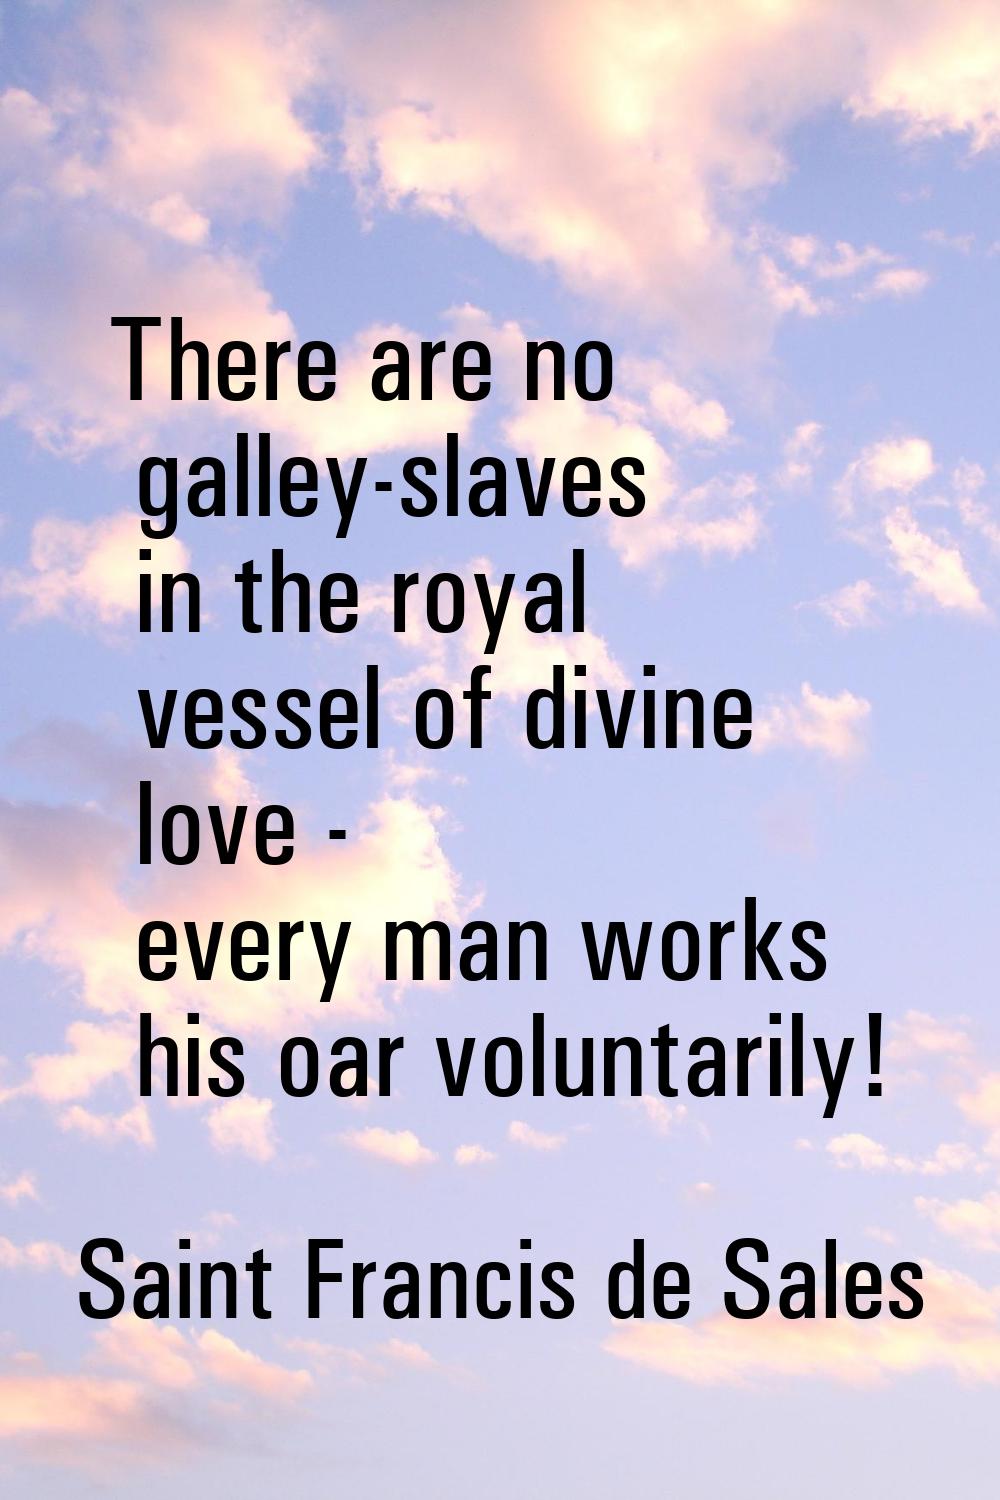 There are no galley-slaves in the royal vessel of divine love - every man works his oar voluntarily